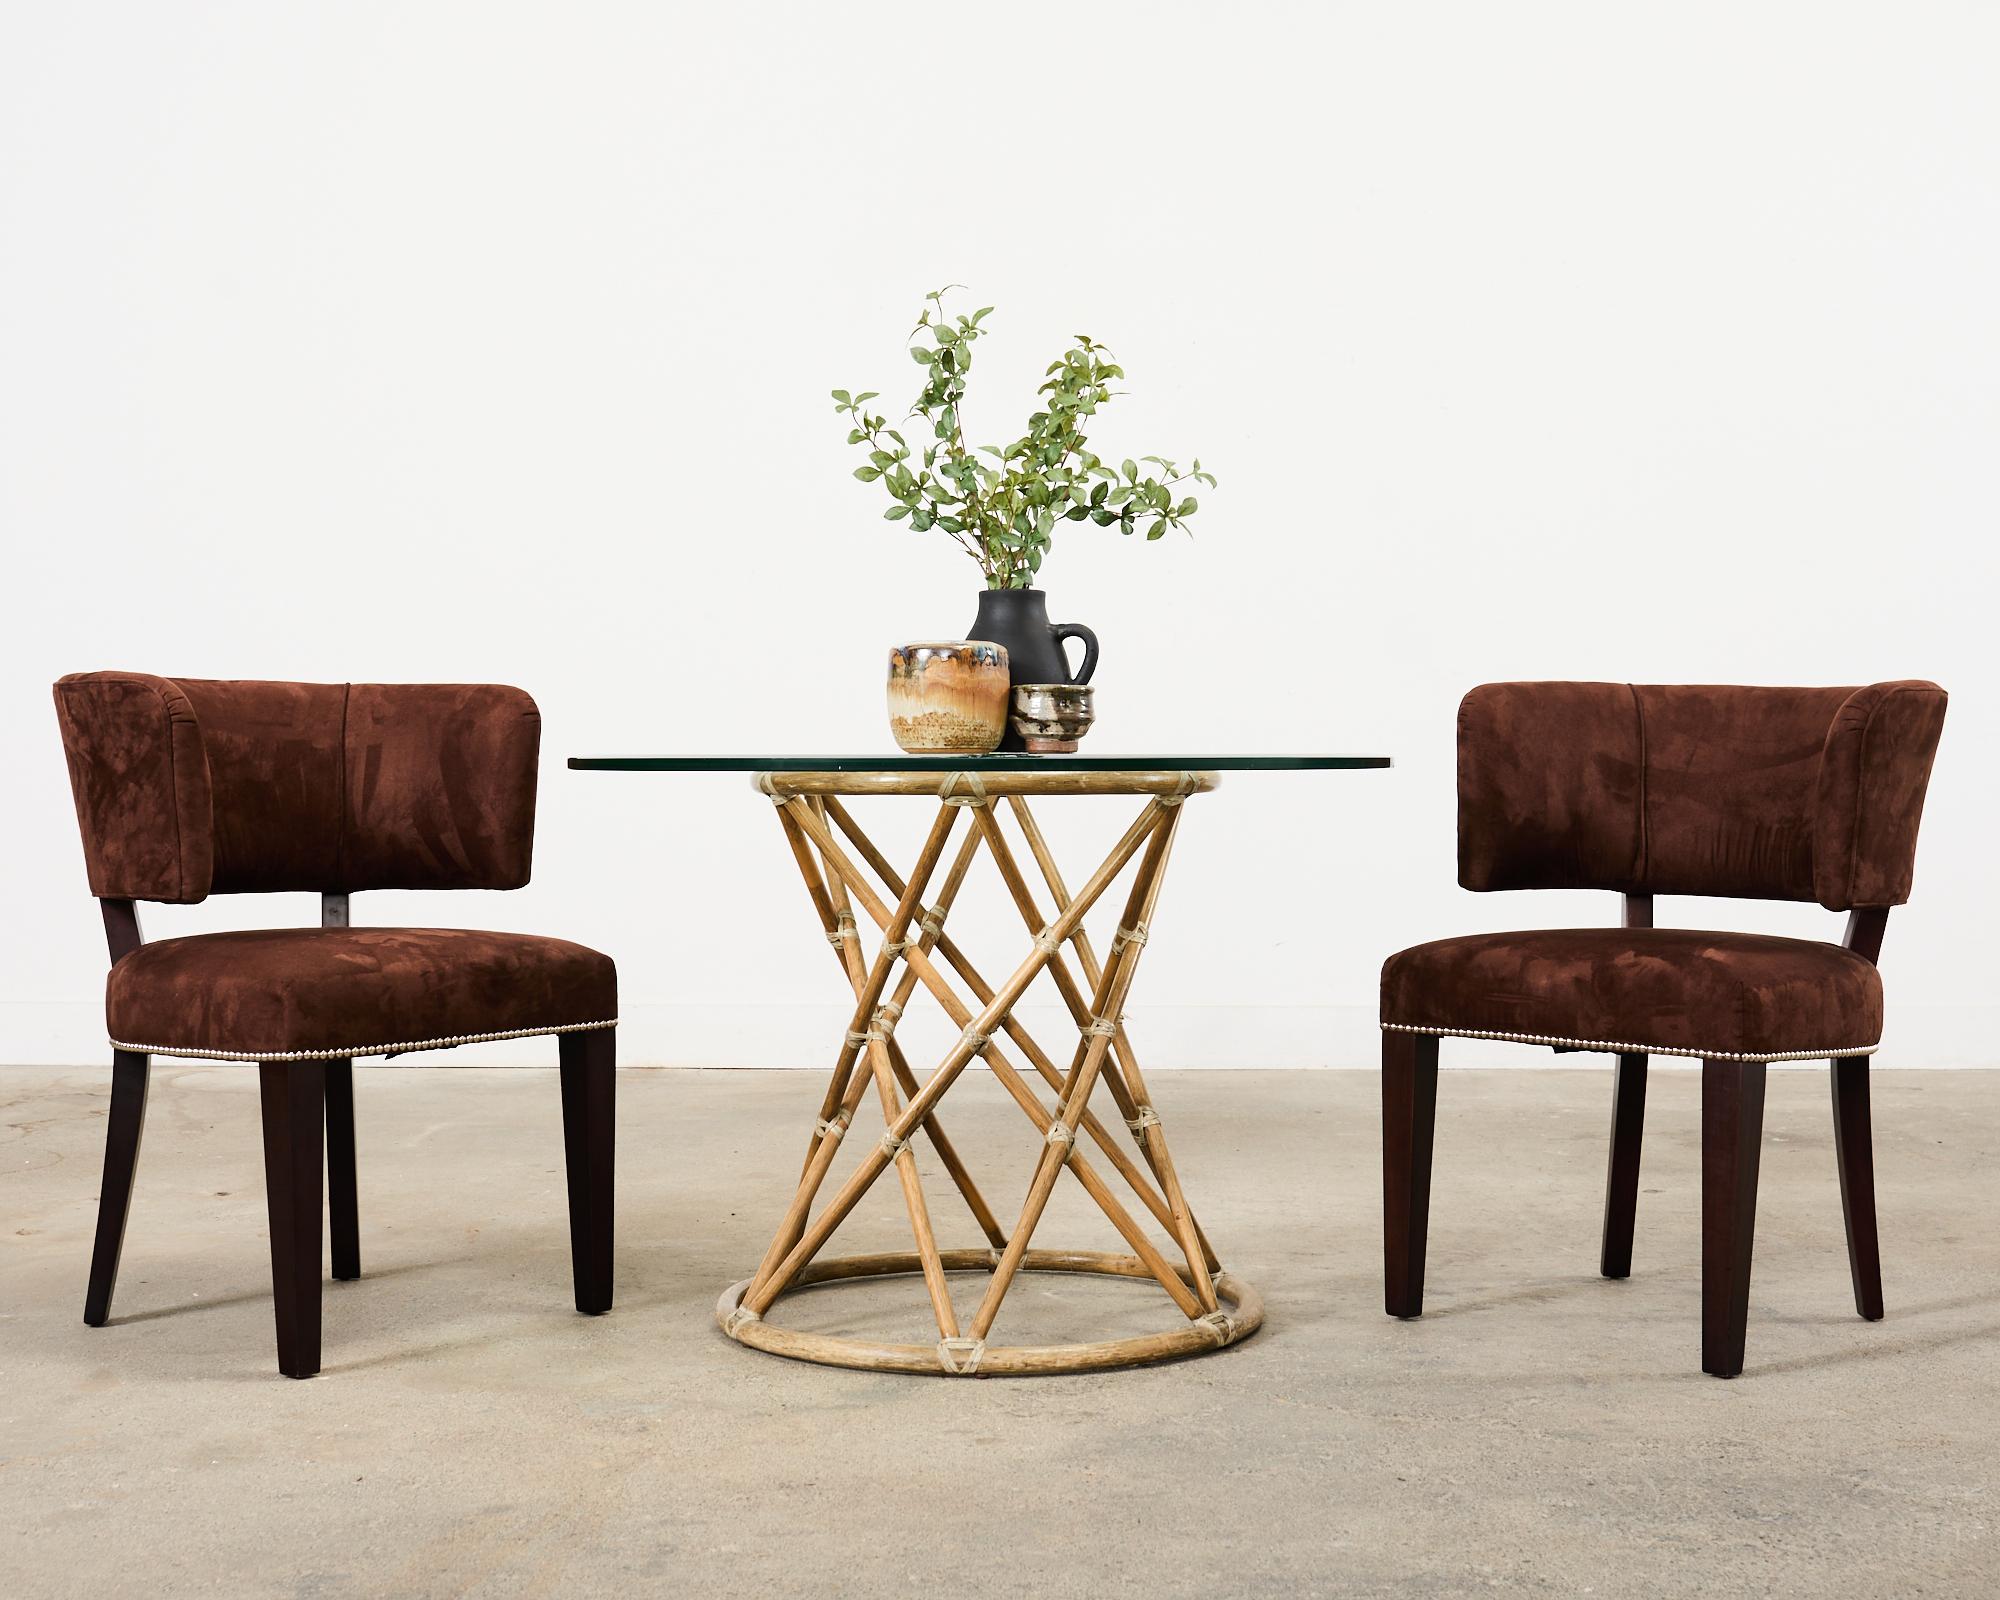 Gorgeous set of six modern barrel back dining chairs designed by Ralph Lauren. Reminiscent of Lauren's new Clivedon chairs with a curved ergonomic back. The mahogany frames have a rich, near ebony dark finish. Upholstered with a thick, plush